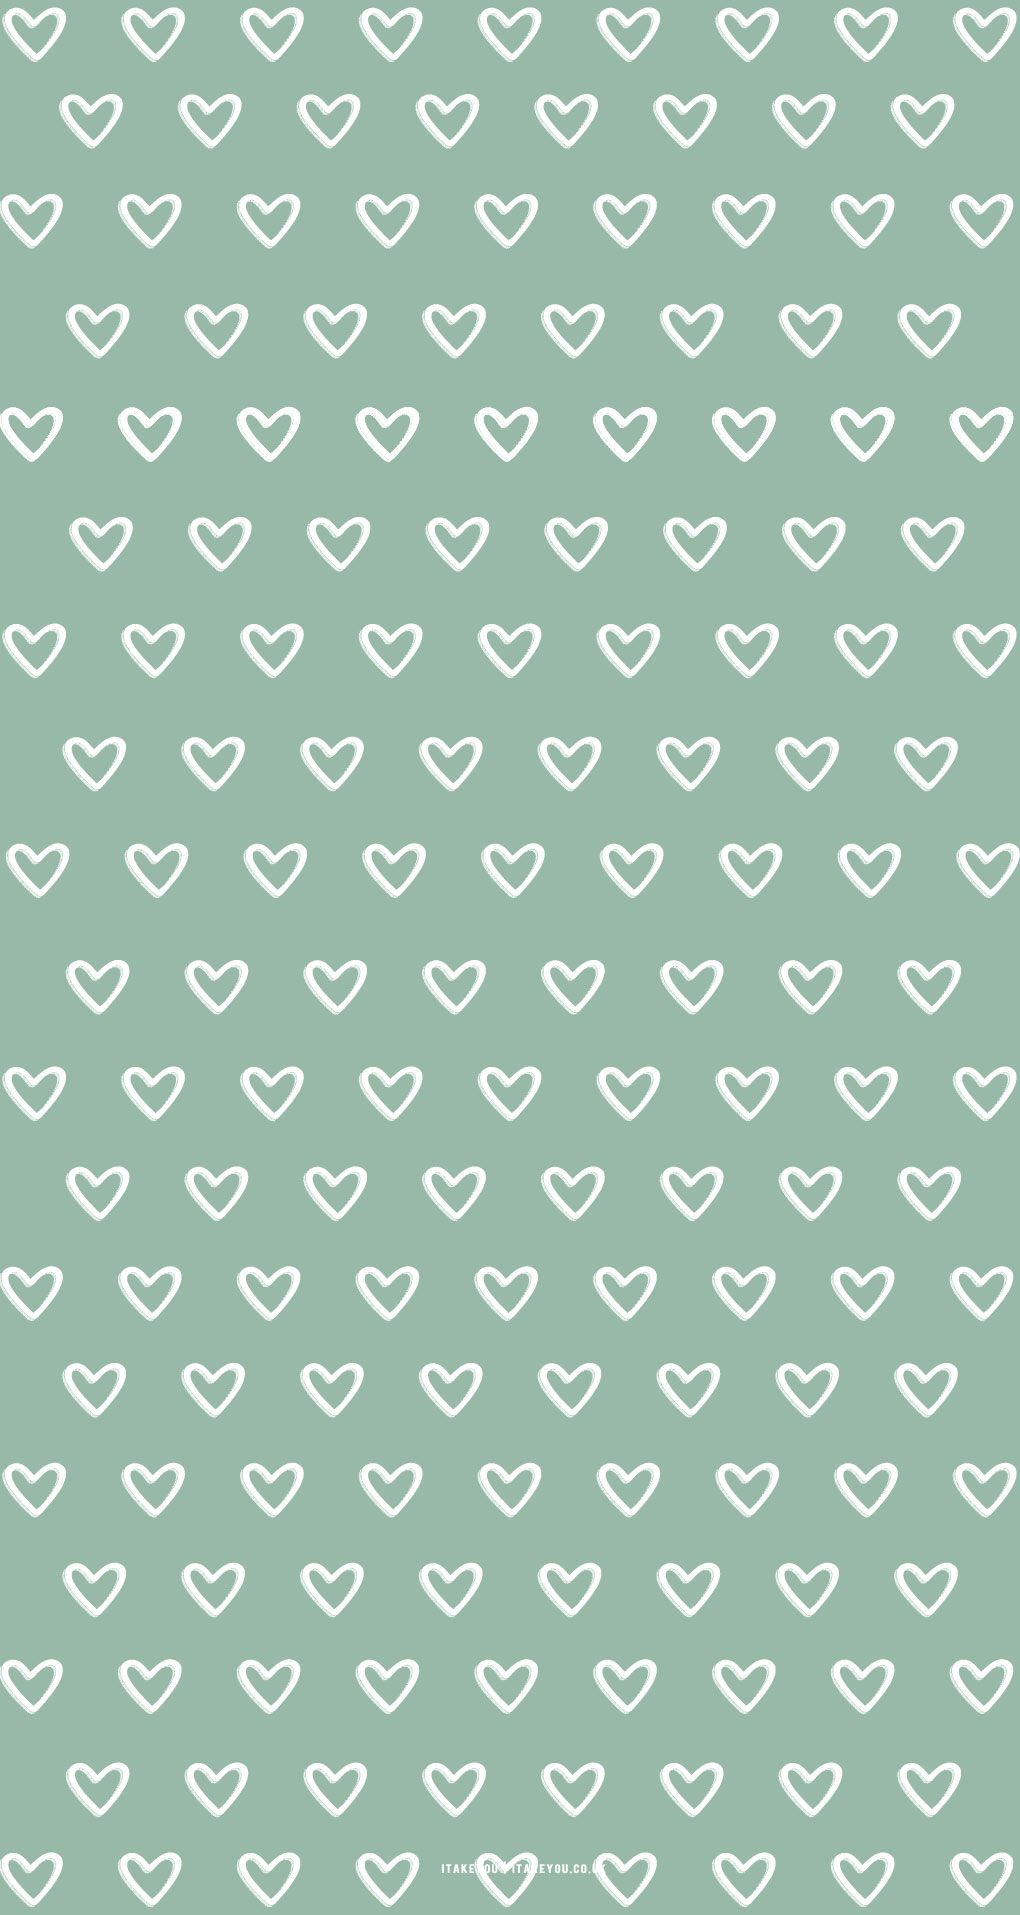 White hearts on a green background - Green, sage green, May, candy cane